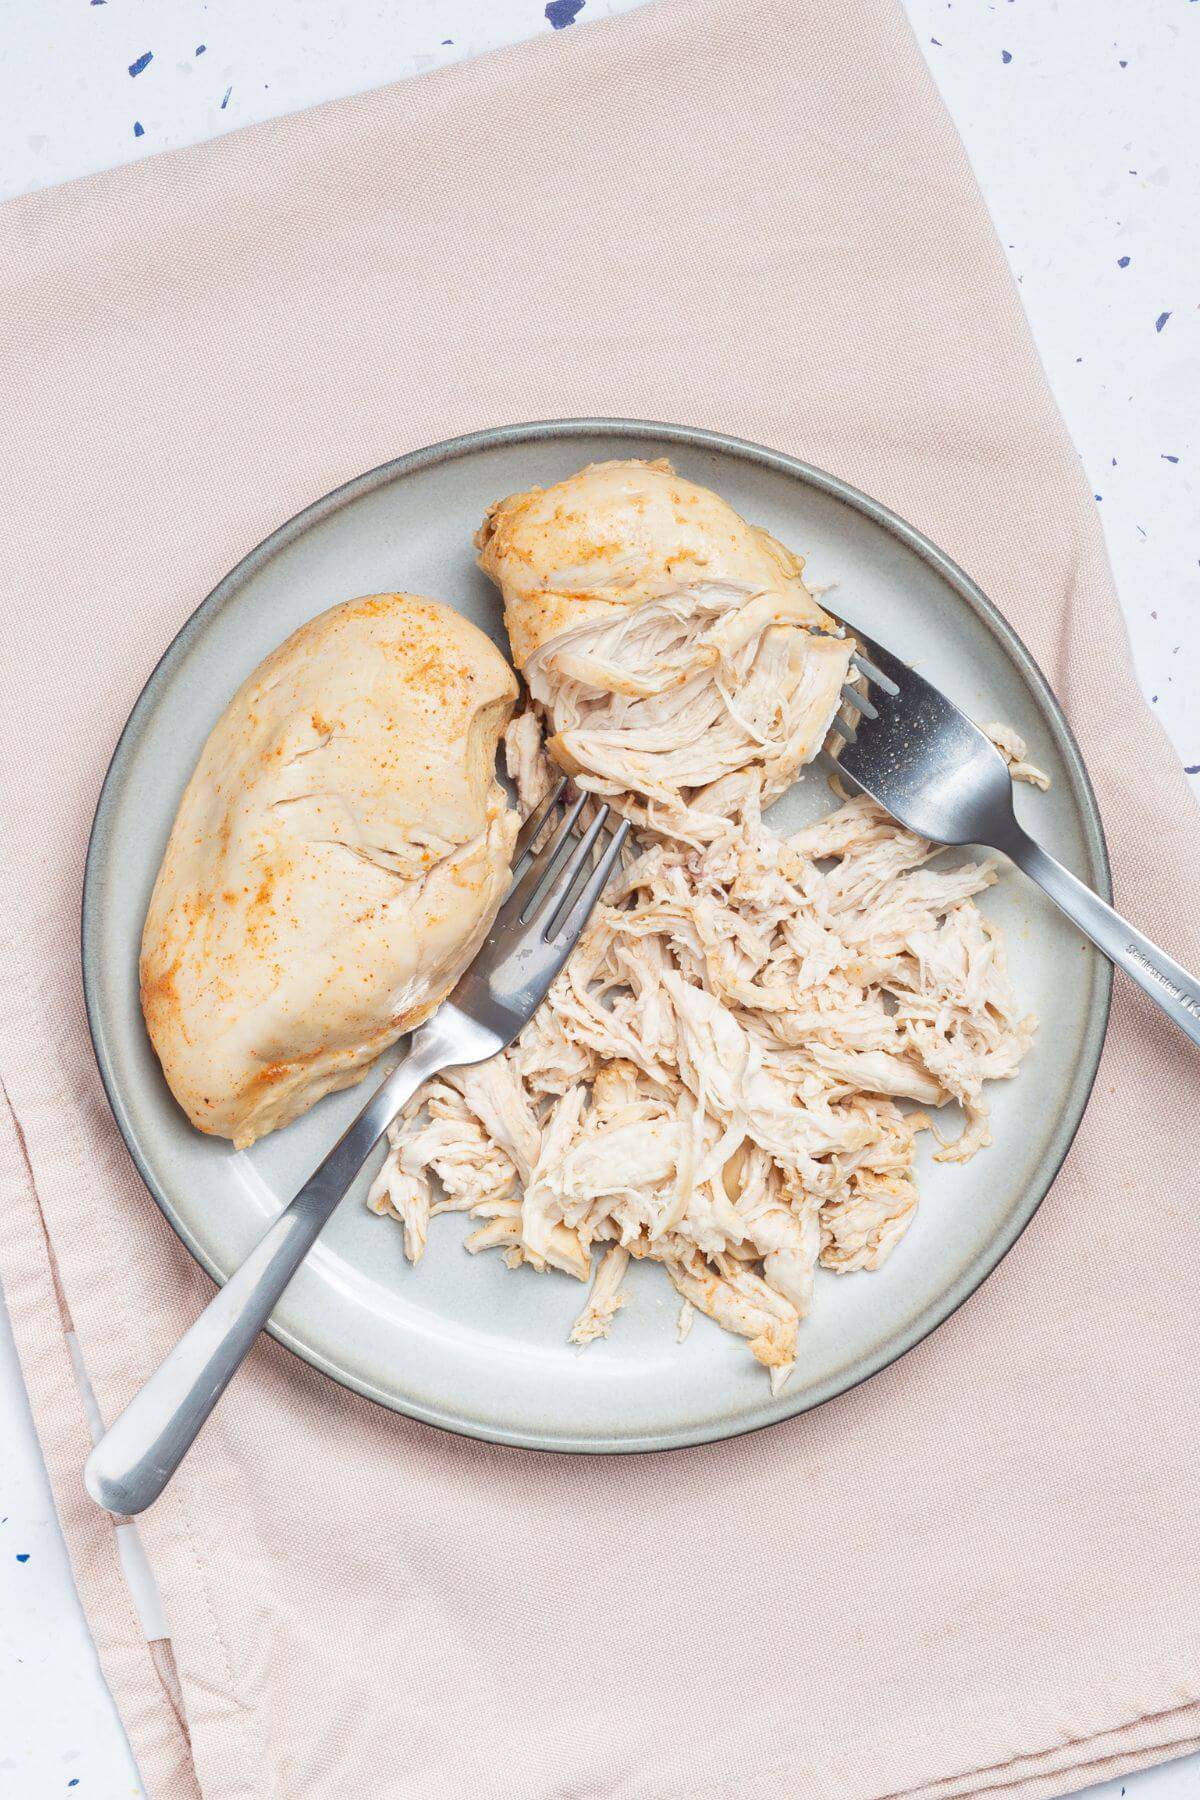 Shredded chicken on a plate with forks.